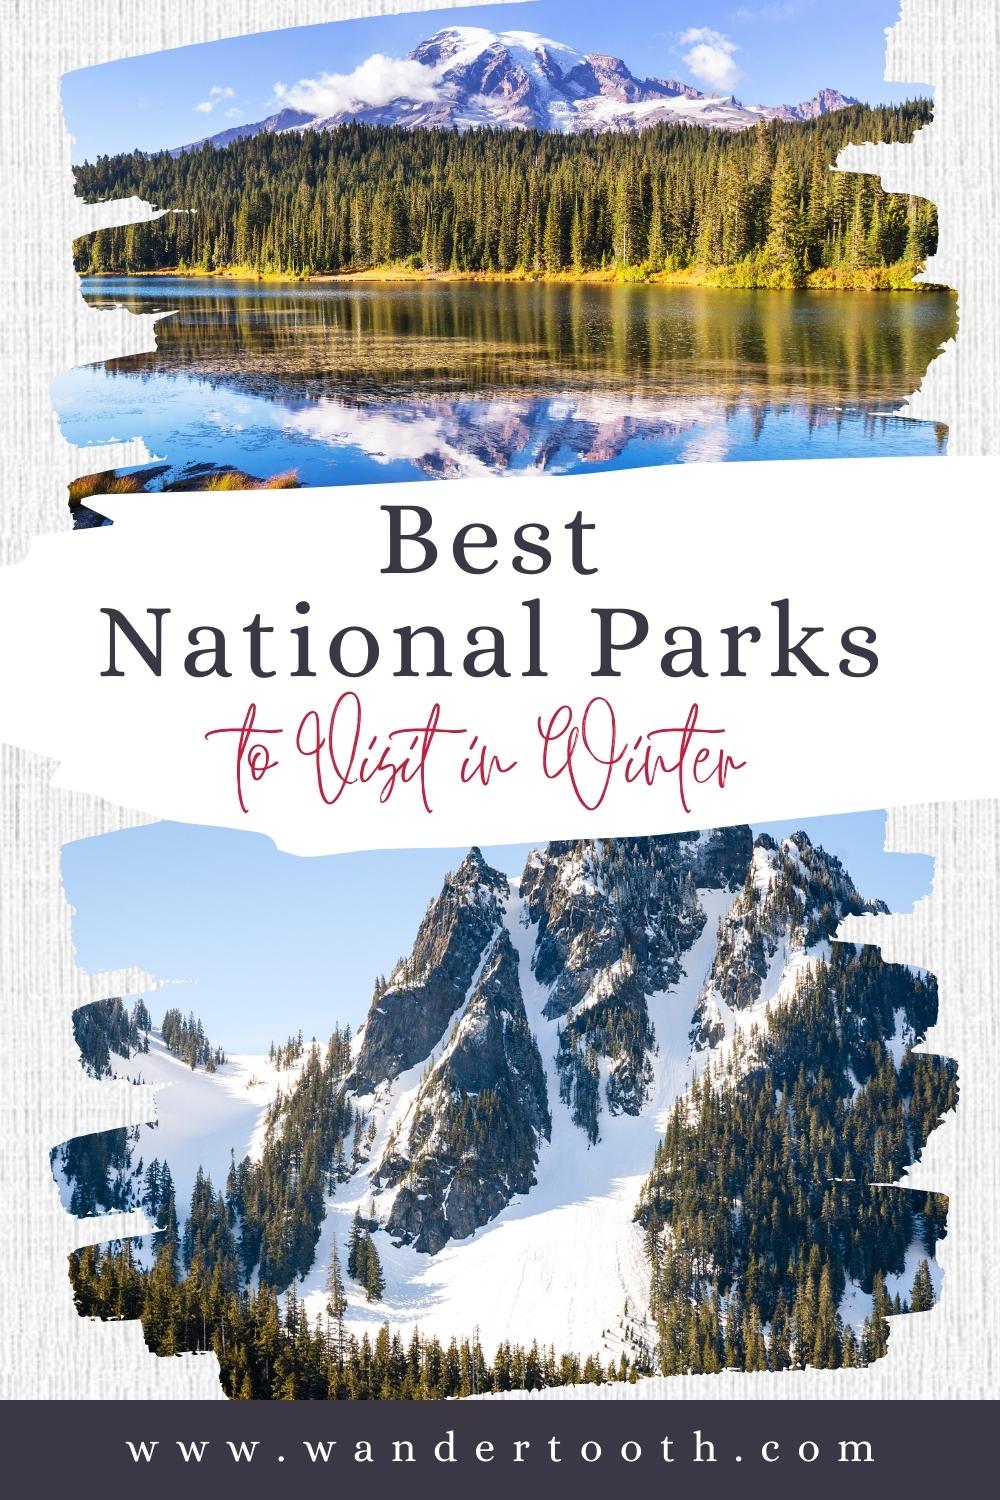 Best National Parks to Visit in Winter - Wandertooth Travel